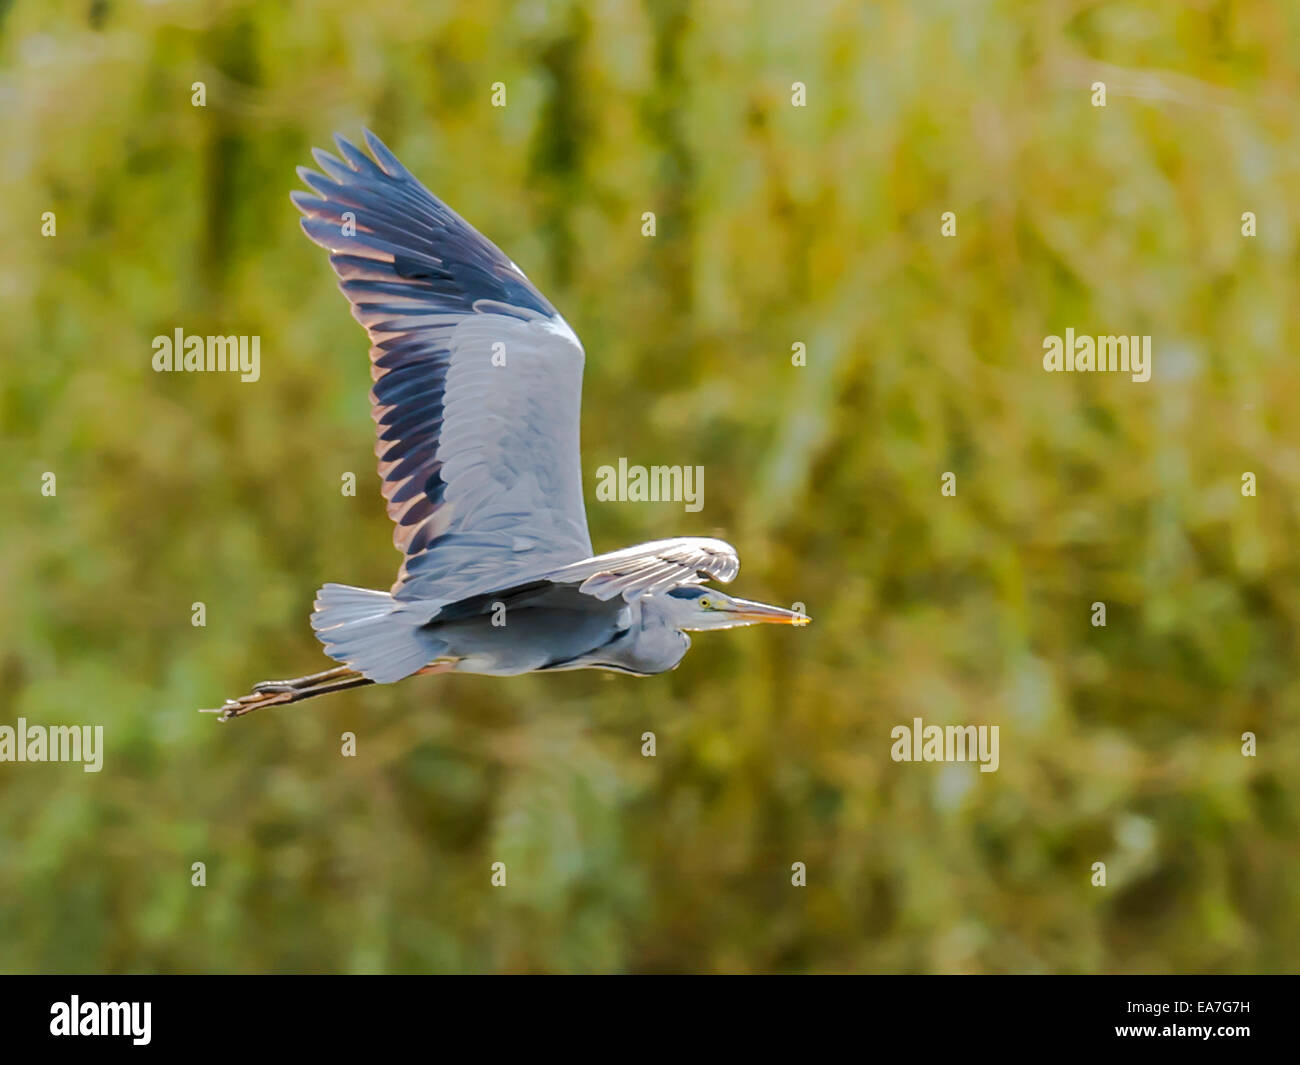 Grey Heron [Ardea cinerea] in full flight, isolated against floral background. Stock Photo